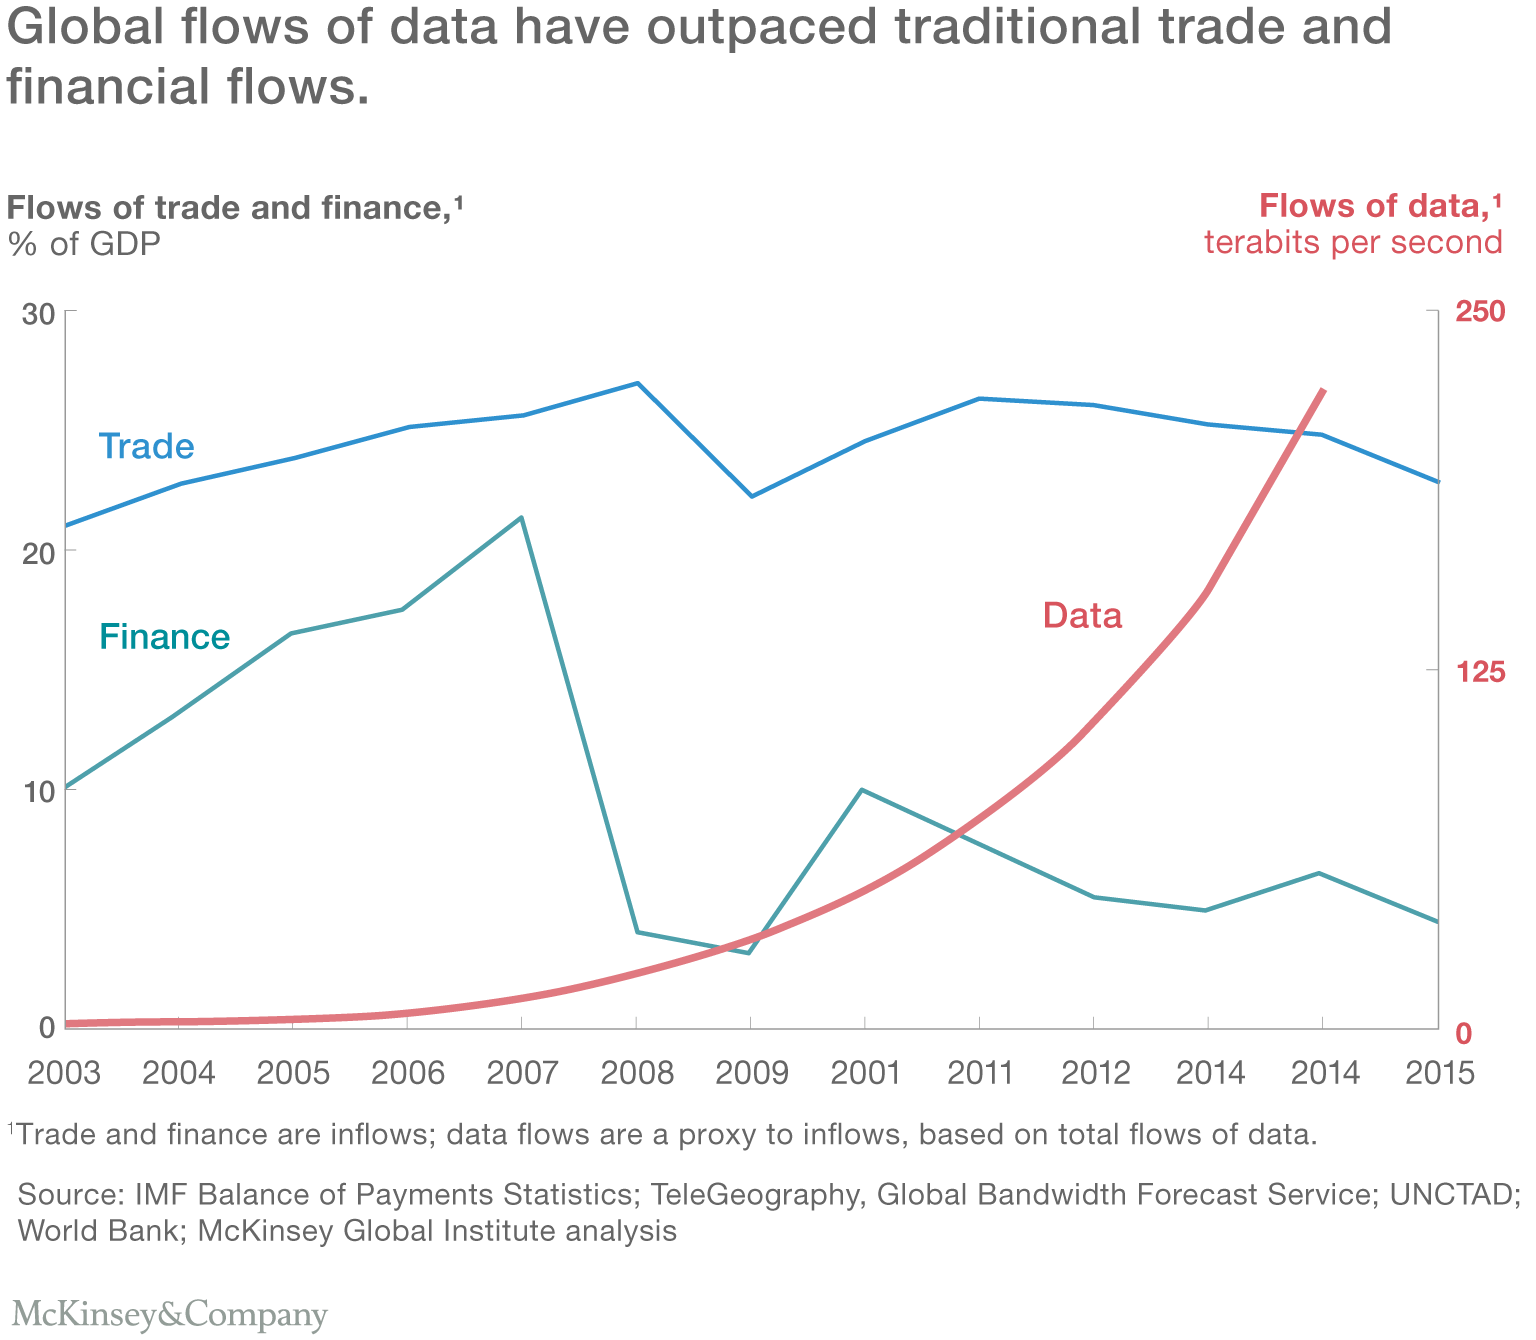 Global flows of data have outpaced traditional trade and financial flows.